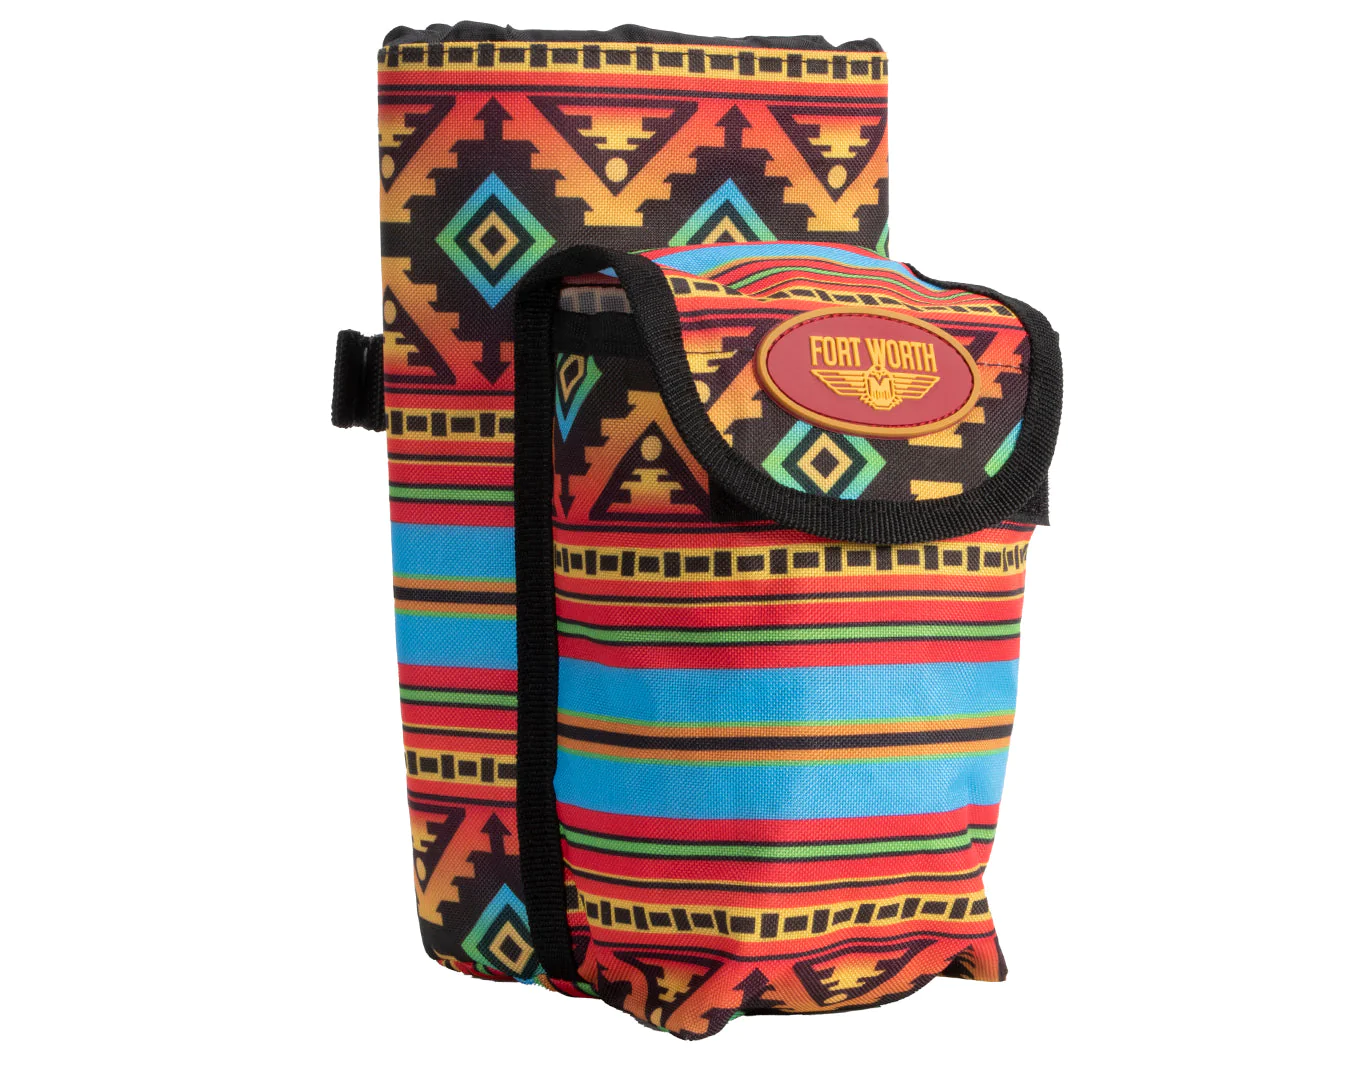 Fort Worth Bottle/Saddle Bag With Pouch Nicoma – Limited Edition